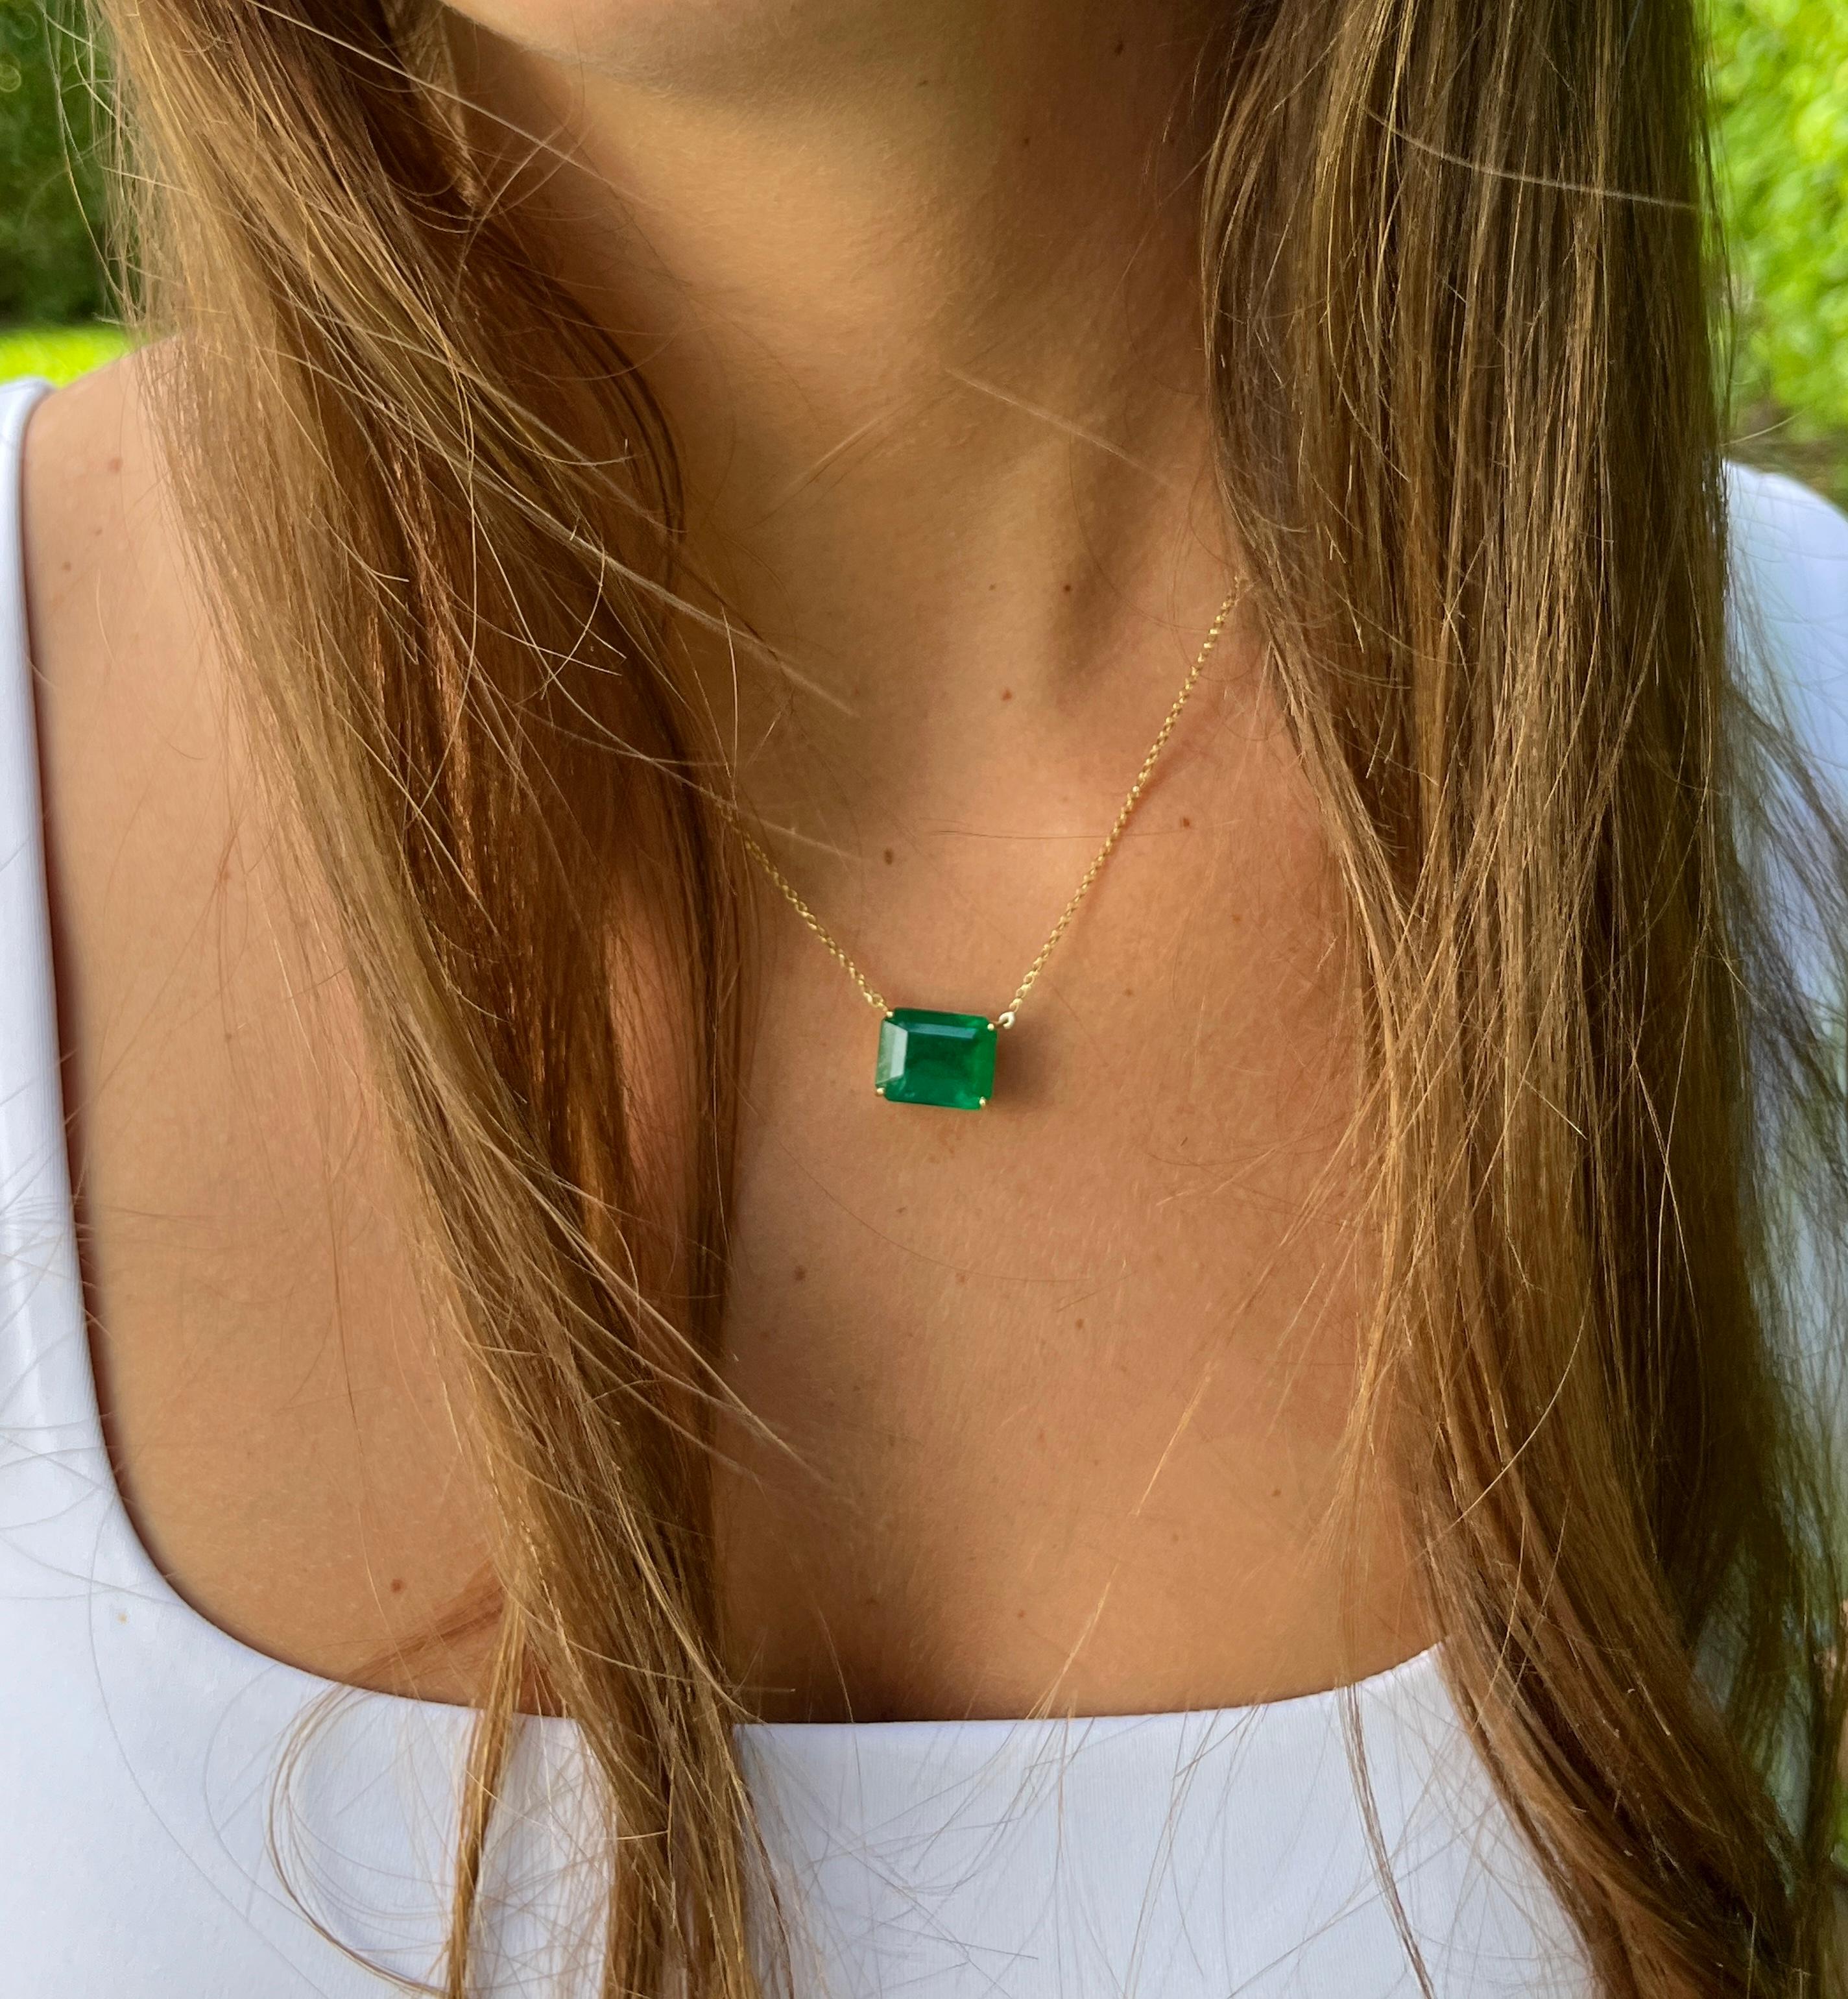 8.67 Carat Vivid Green Colombian Emerald Solitaire Pendant Necklace in 18K Gold For Sale 2